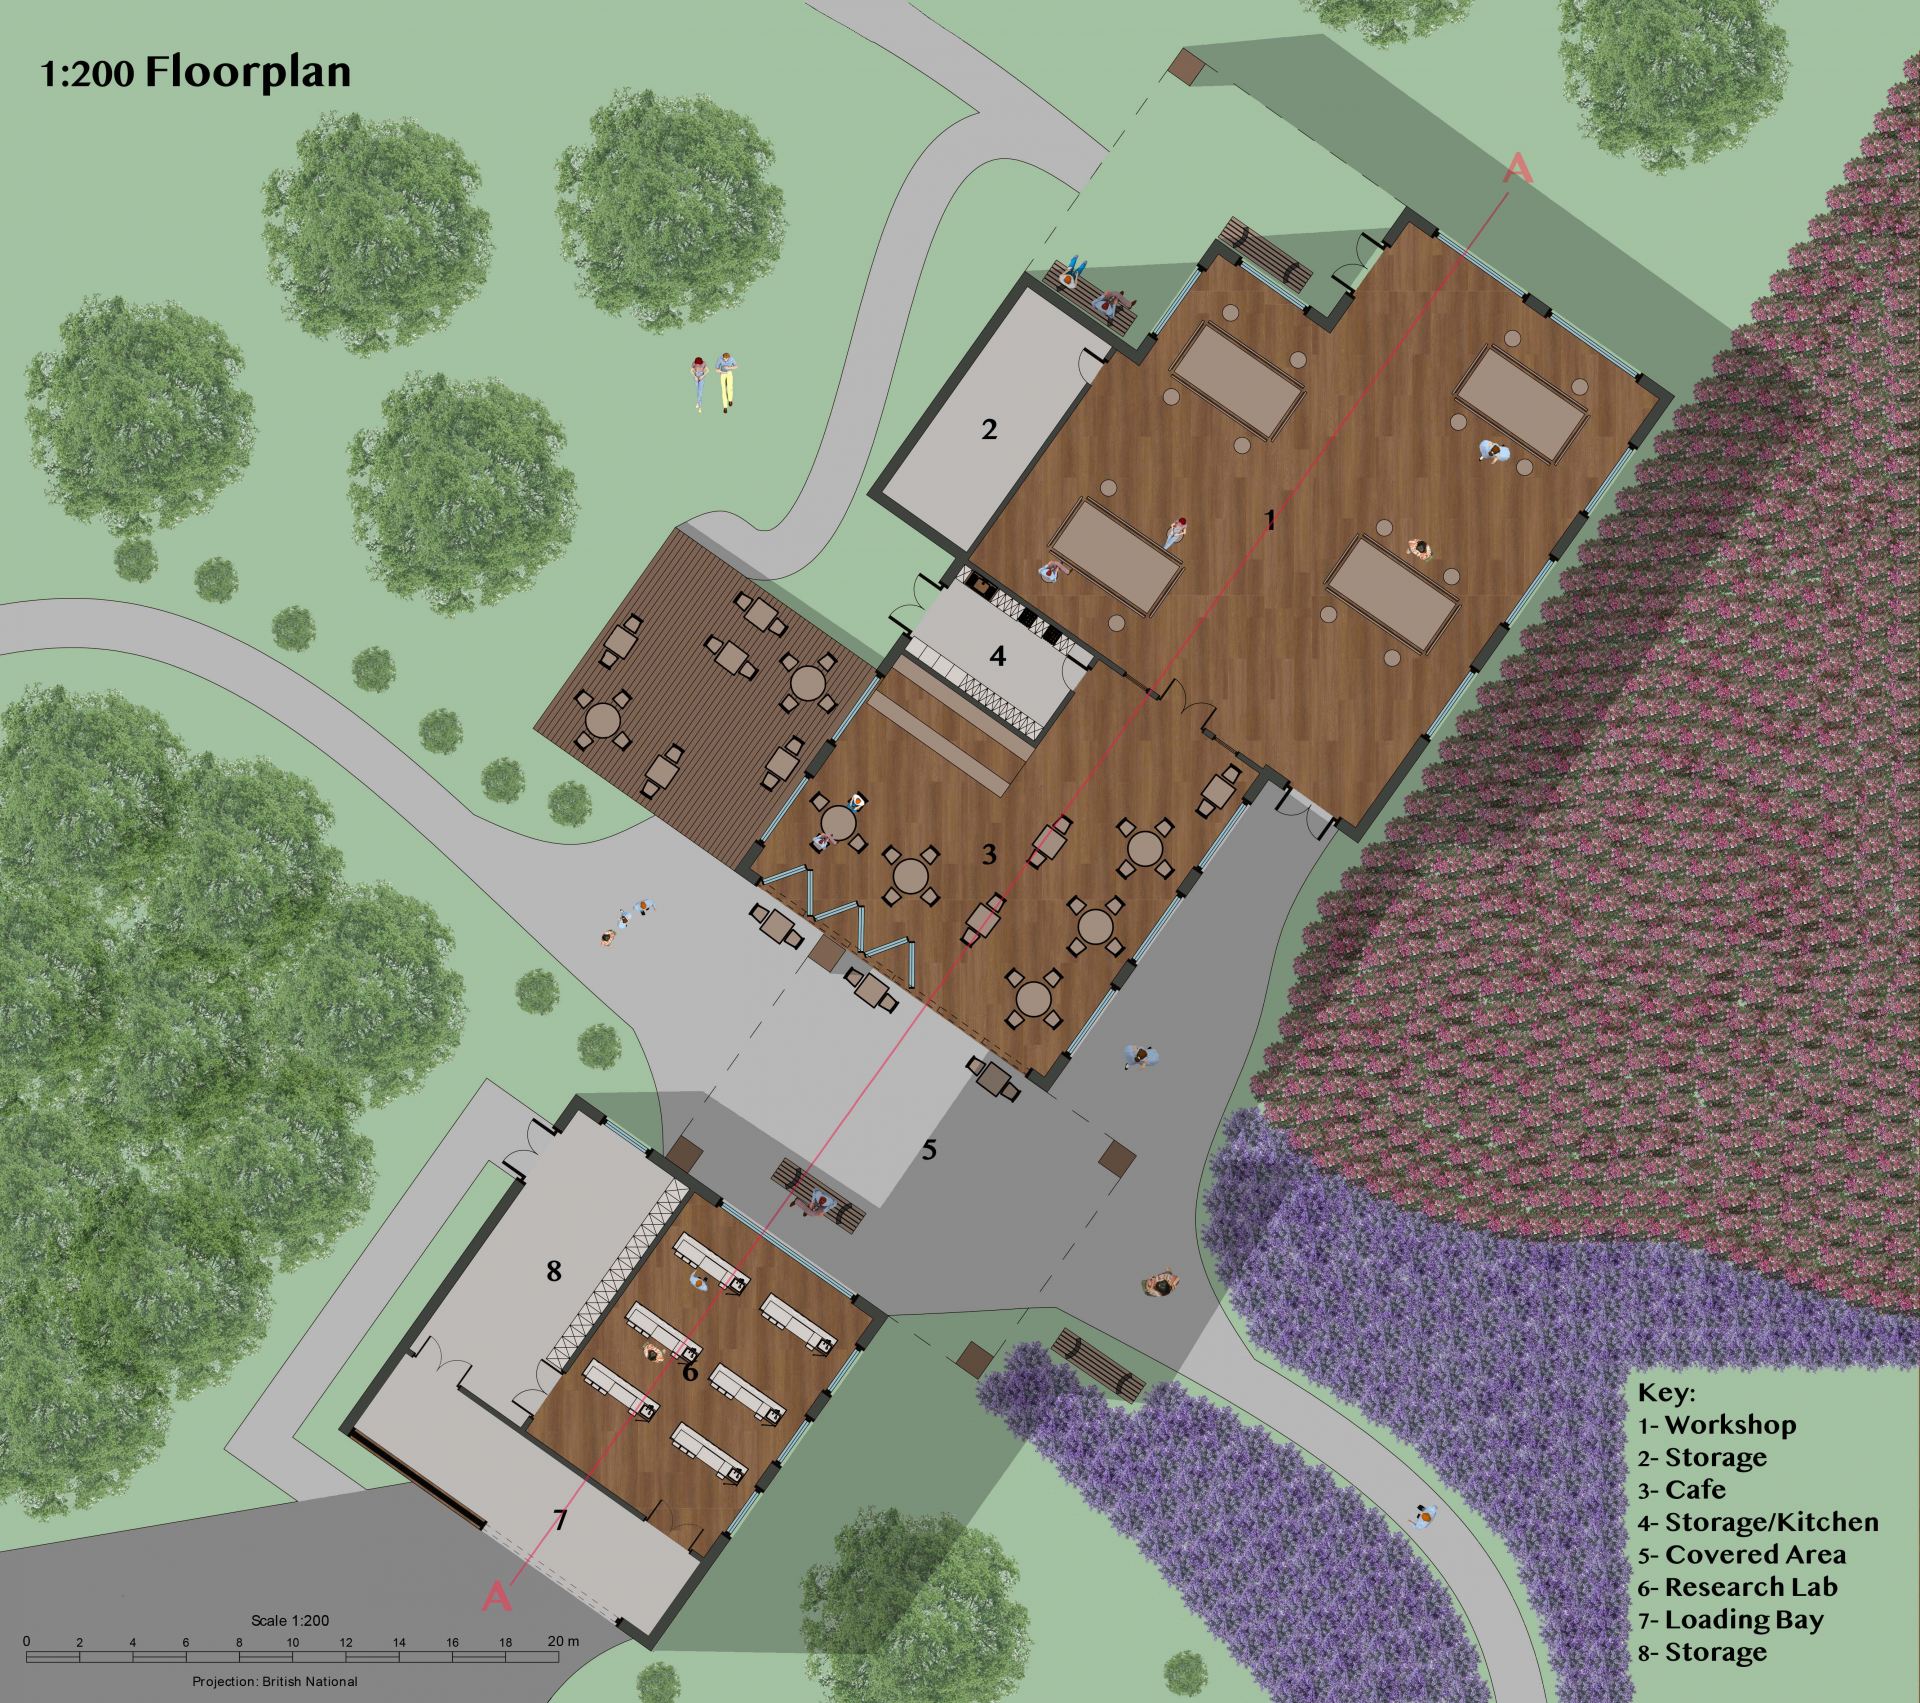 This is the Floorplan of the building. Showing a research/visitors centre.